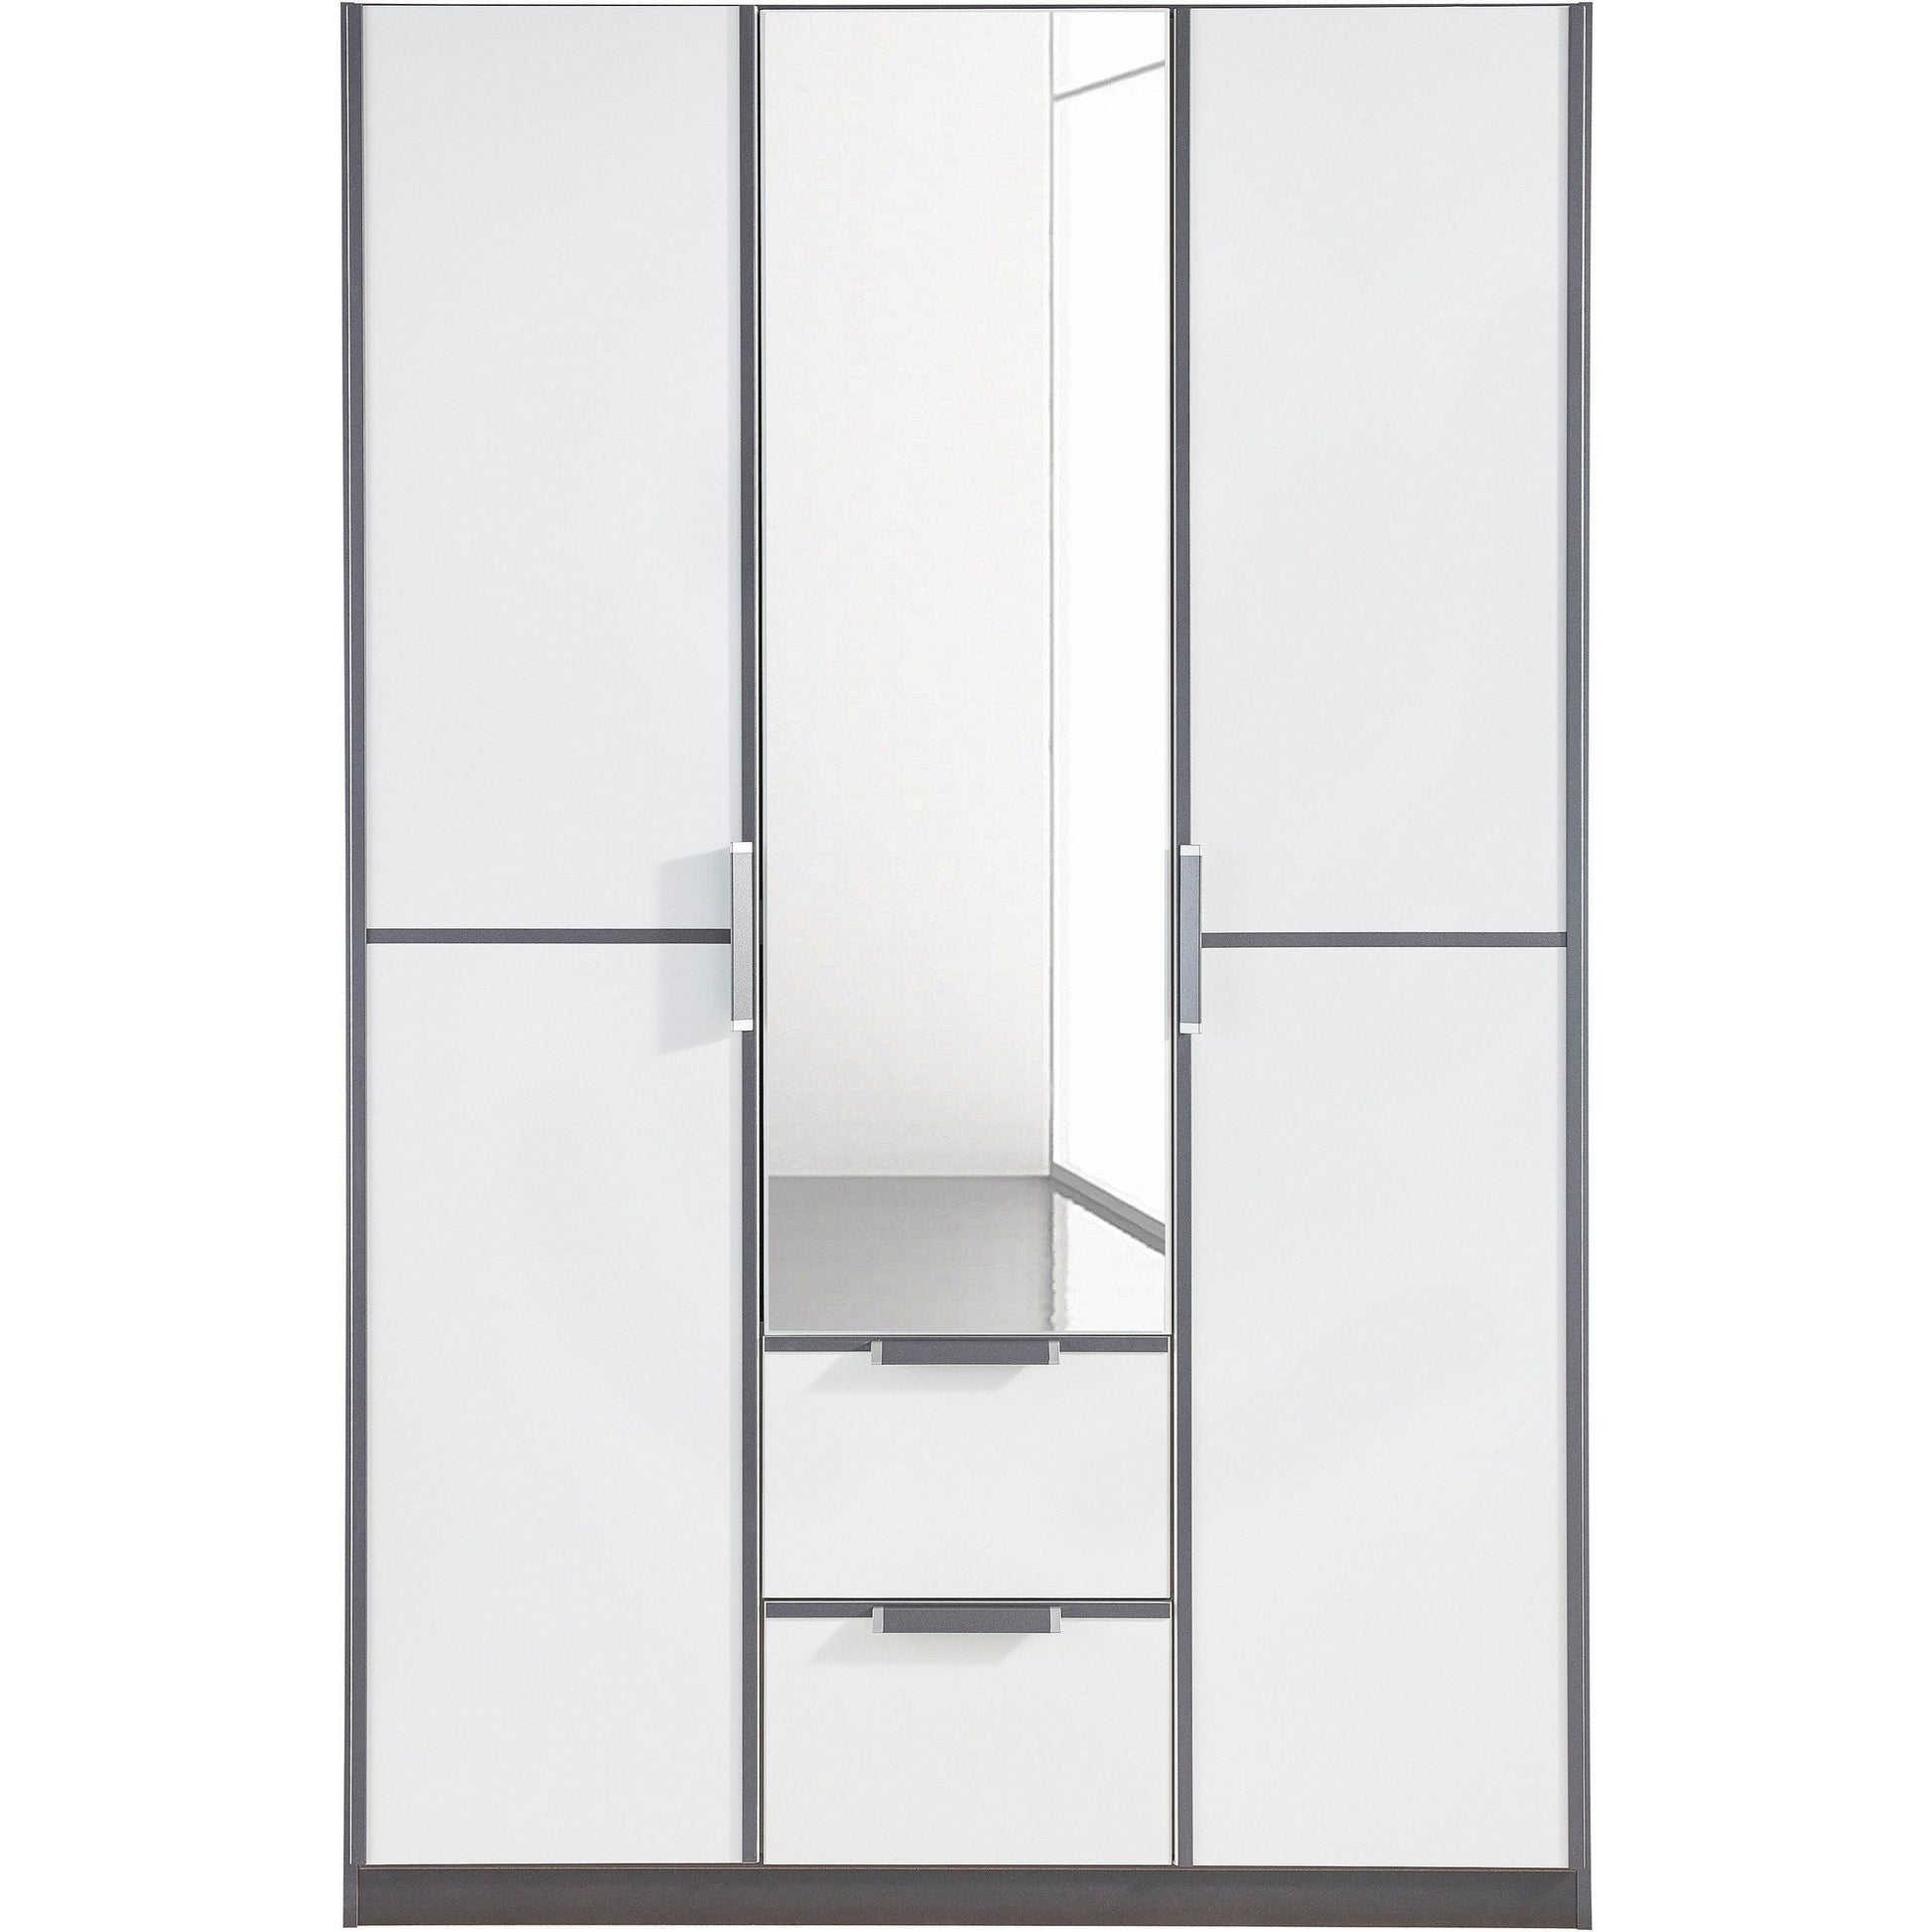 Essence Modular Wardrobe with Drawers Graphite and White Glass